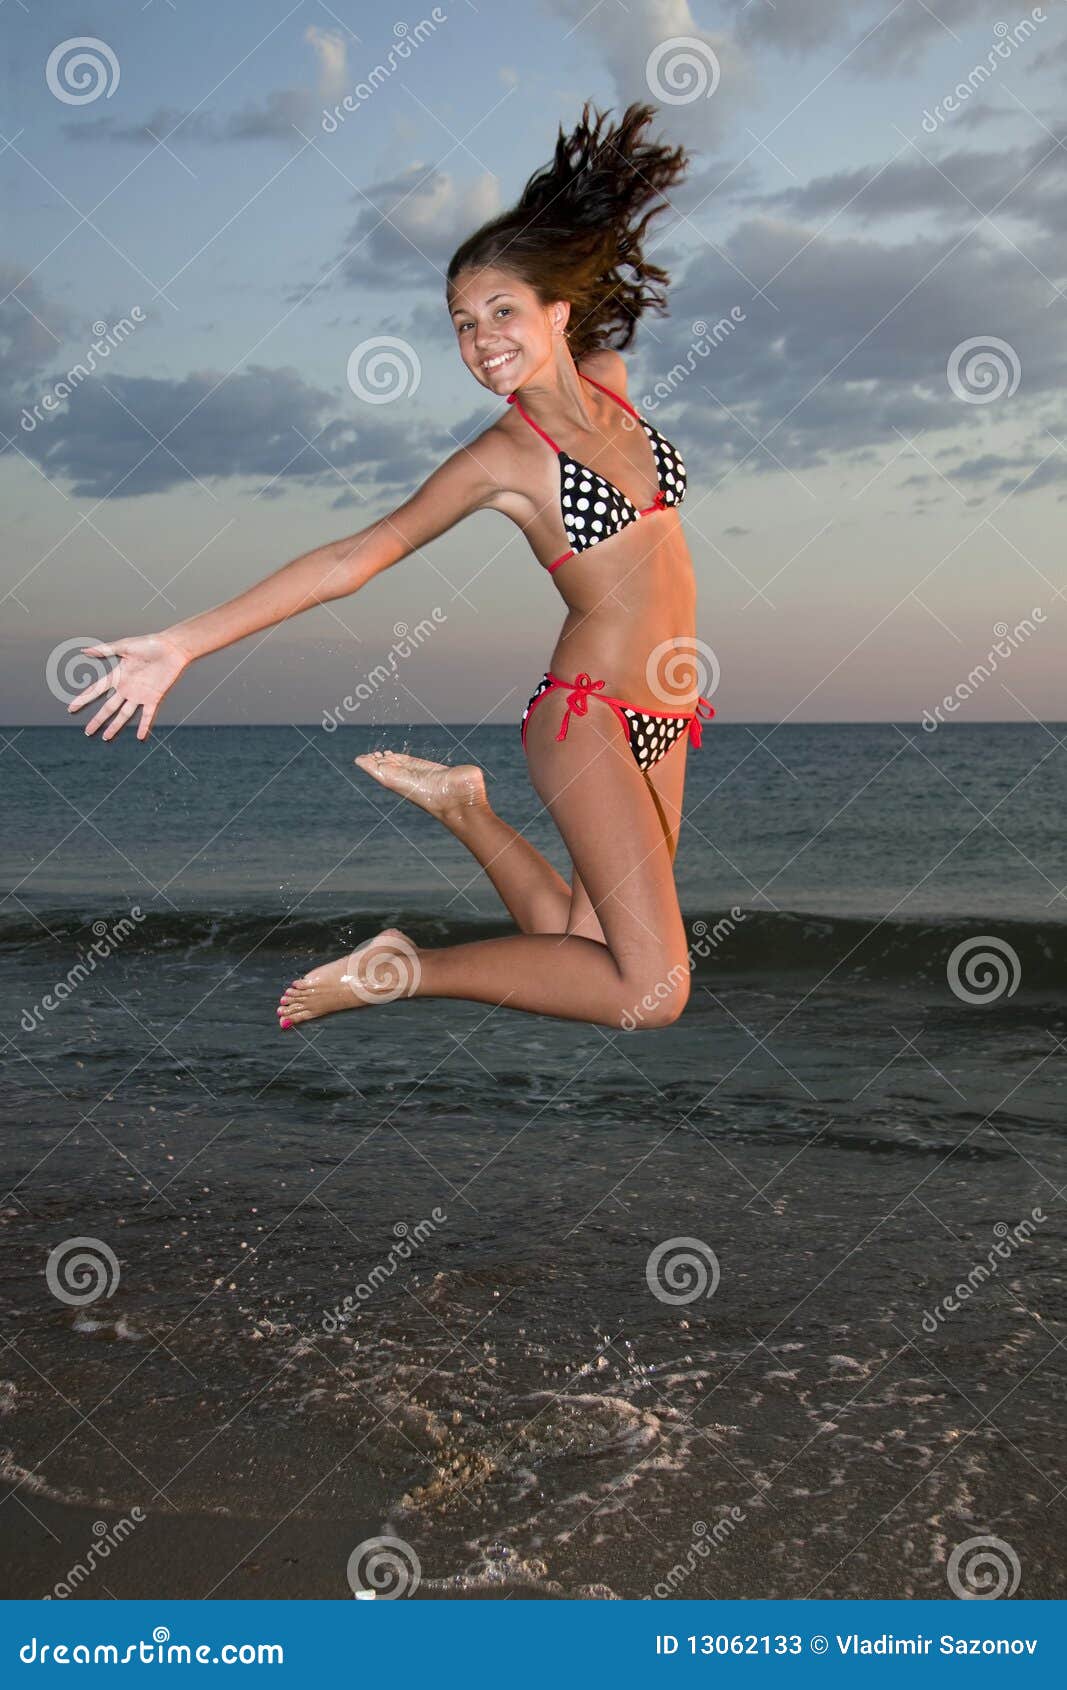 Jumping girl on the beach. I can fly.